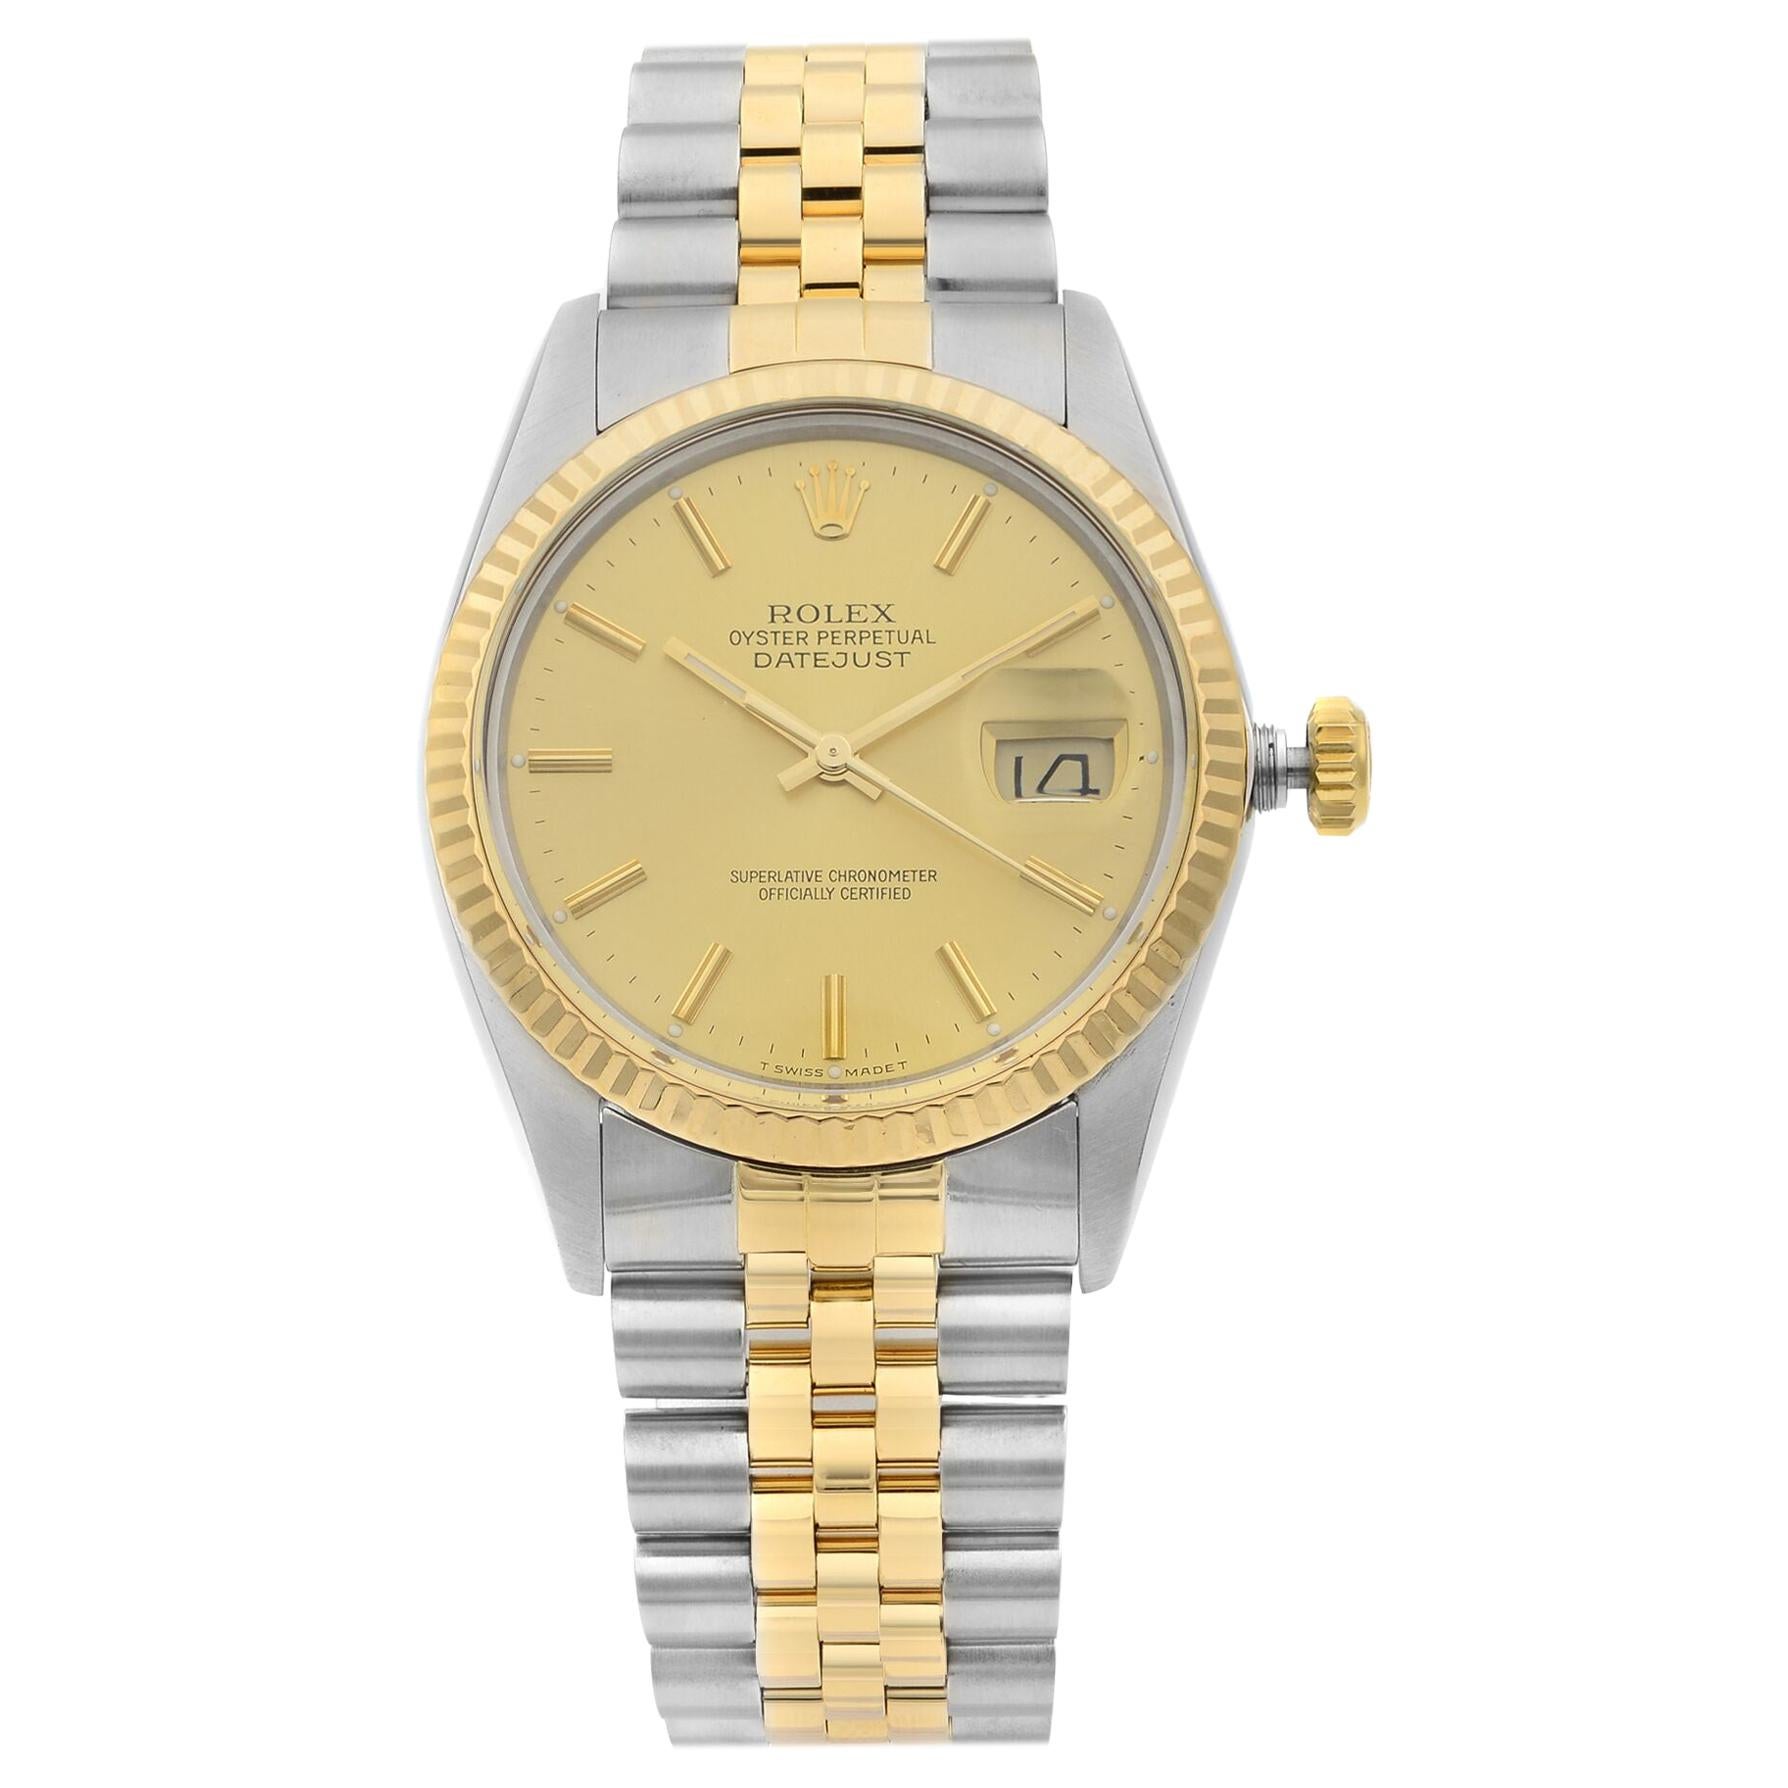 Rolex Datejust 18K Yellow Gold Steel Champagne Dial Automatic Men's Watch 16013